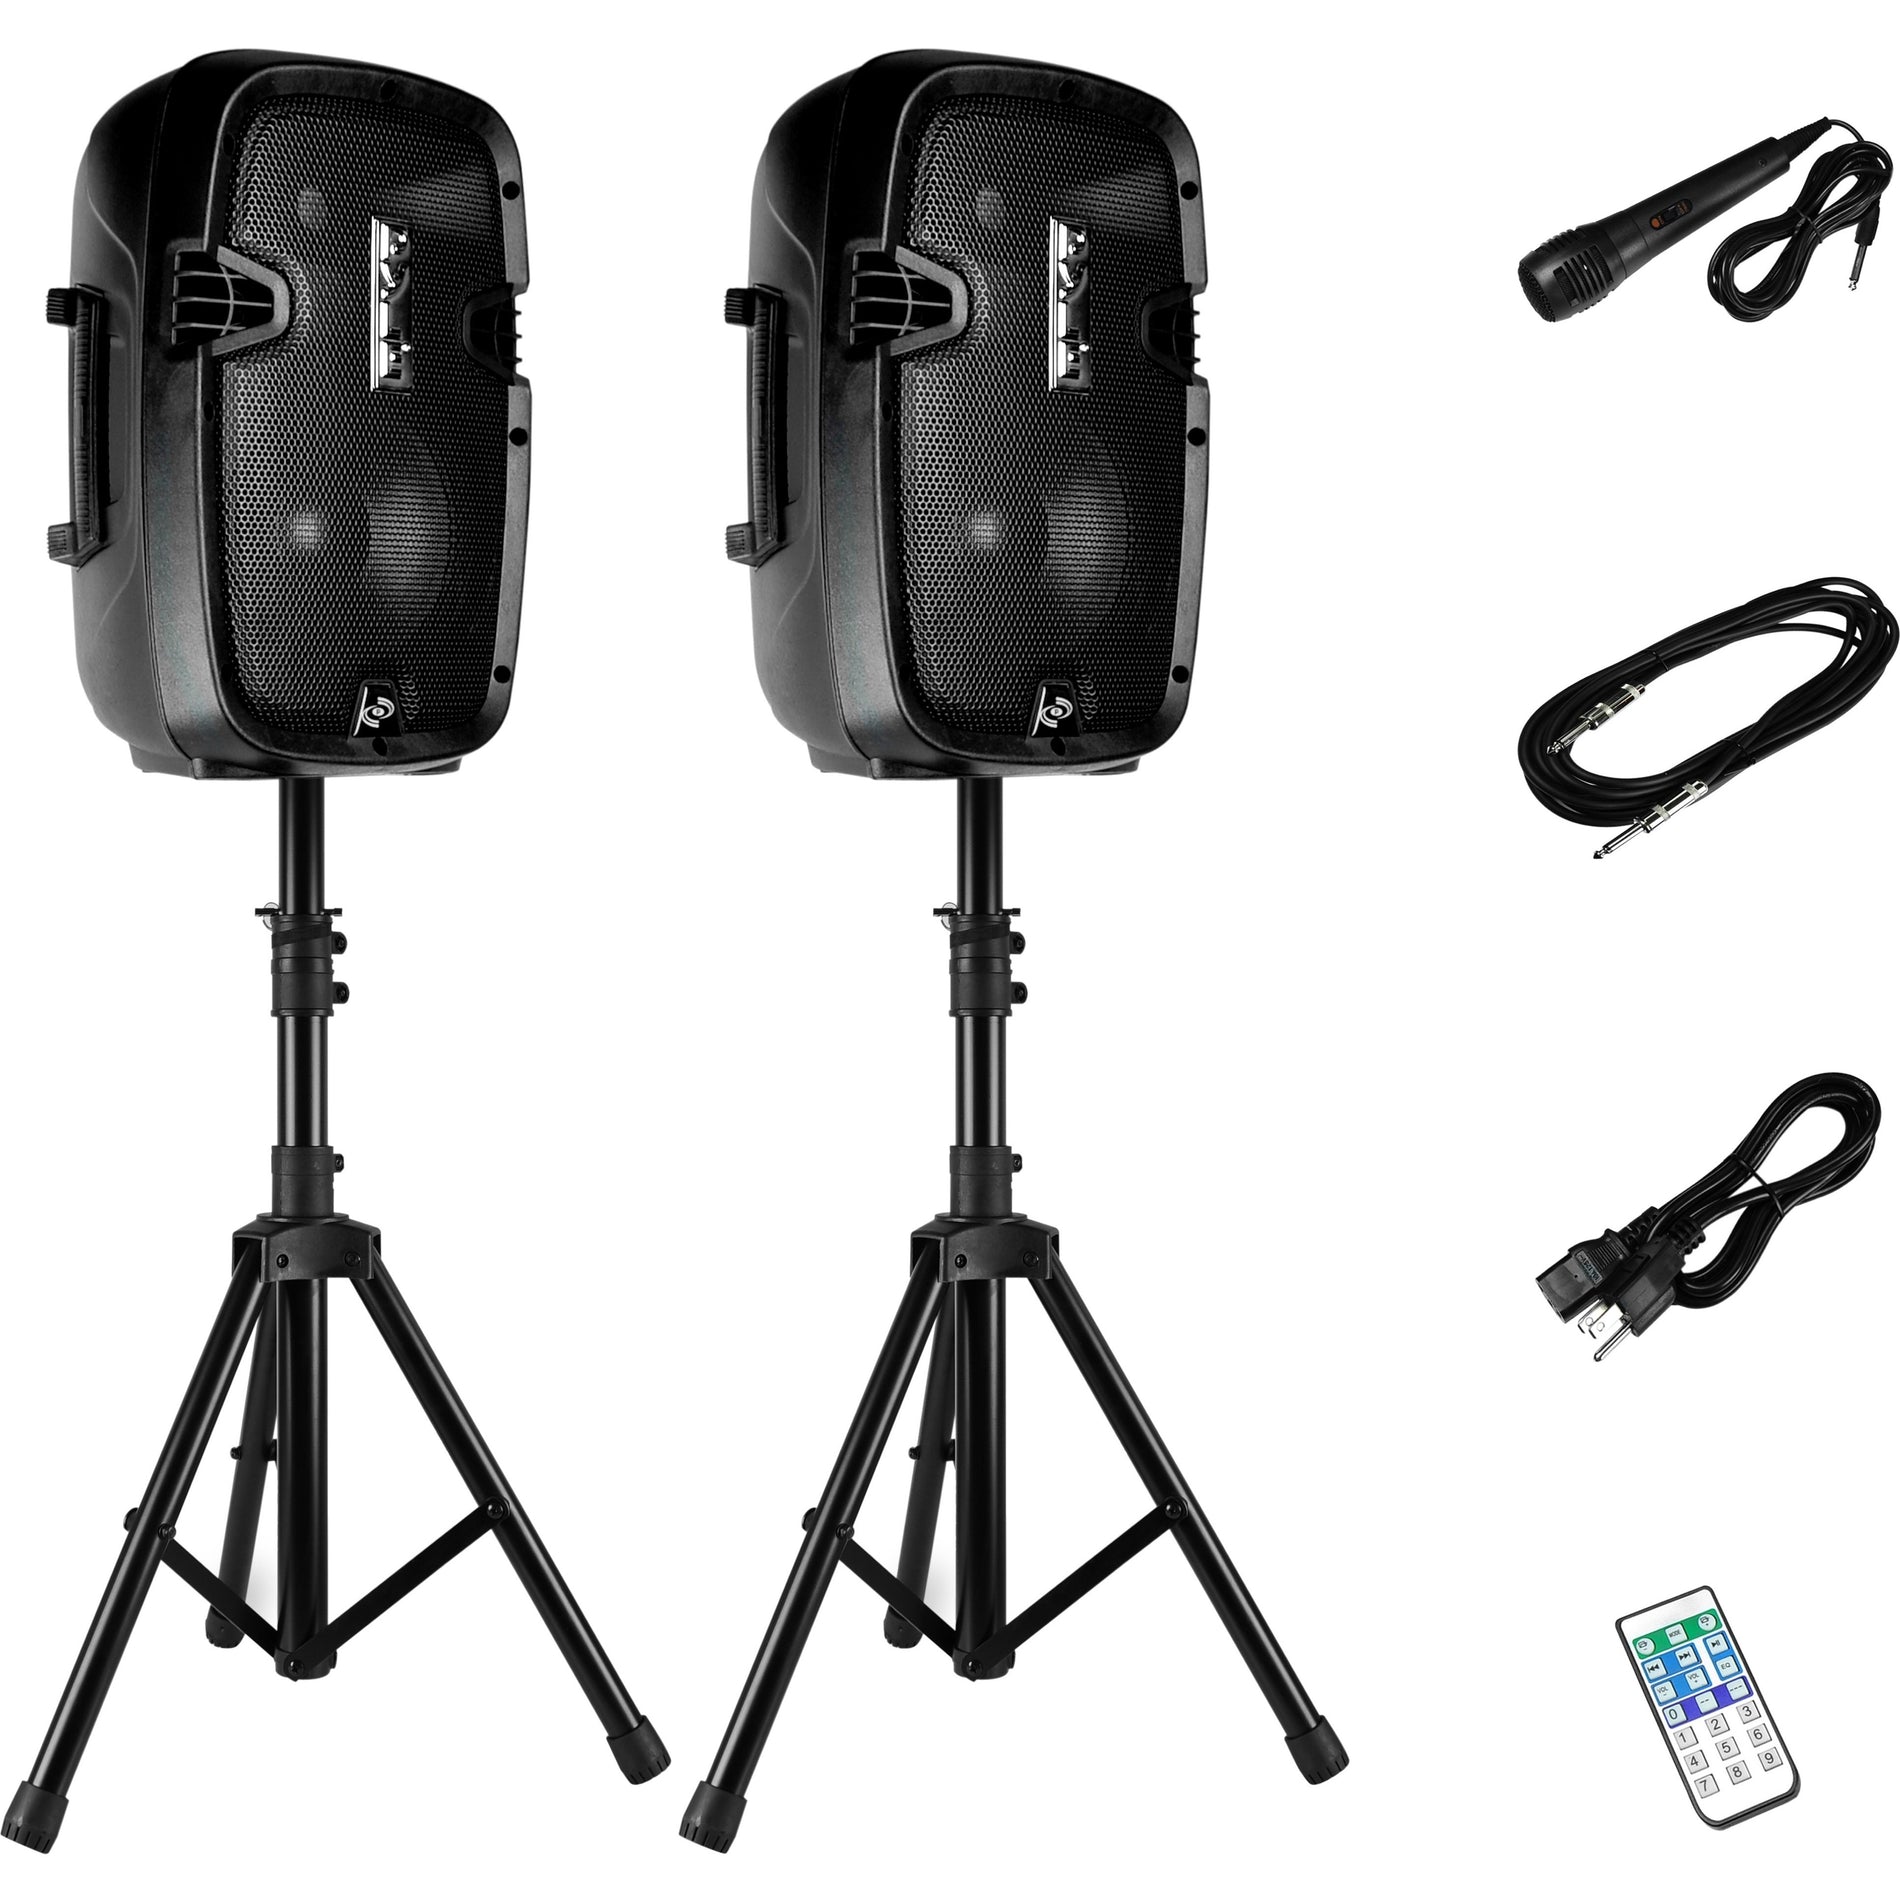 Pyle PPHP849KT Active + Passive PA Speaker System Kit, 8'' Speakers, Speaker Stands, Wired Microphone, Remote Control